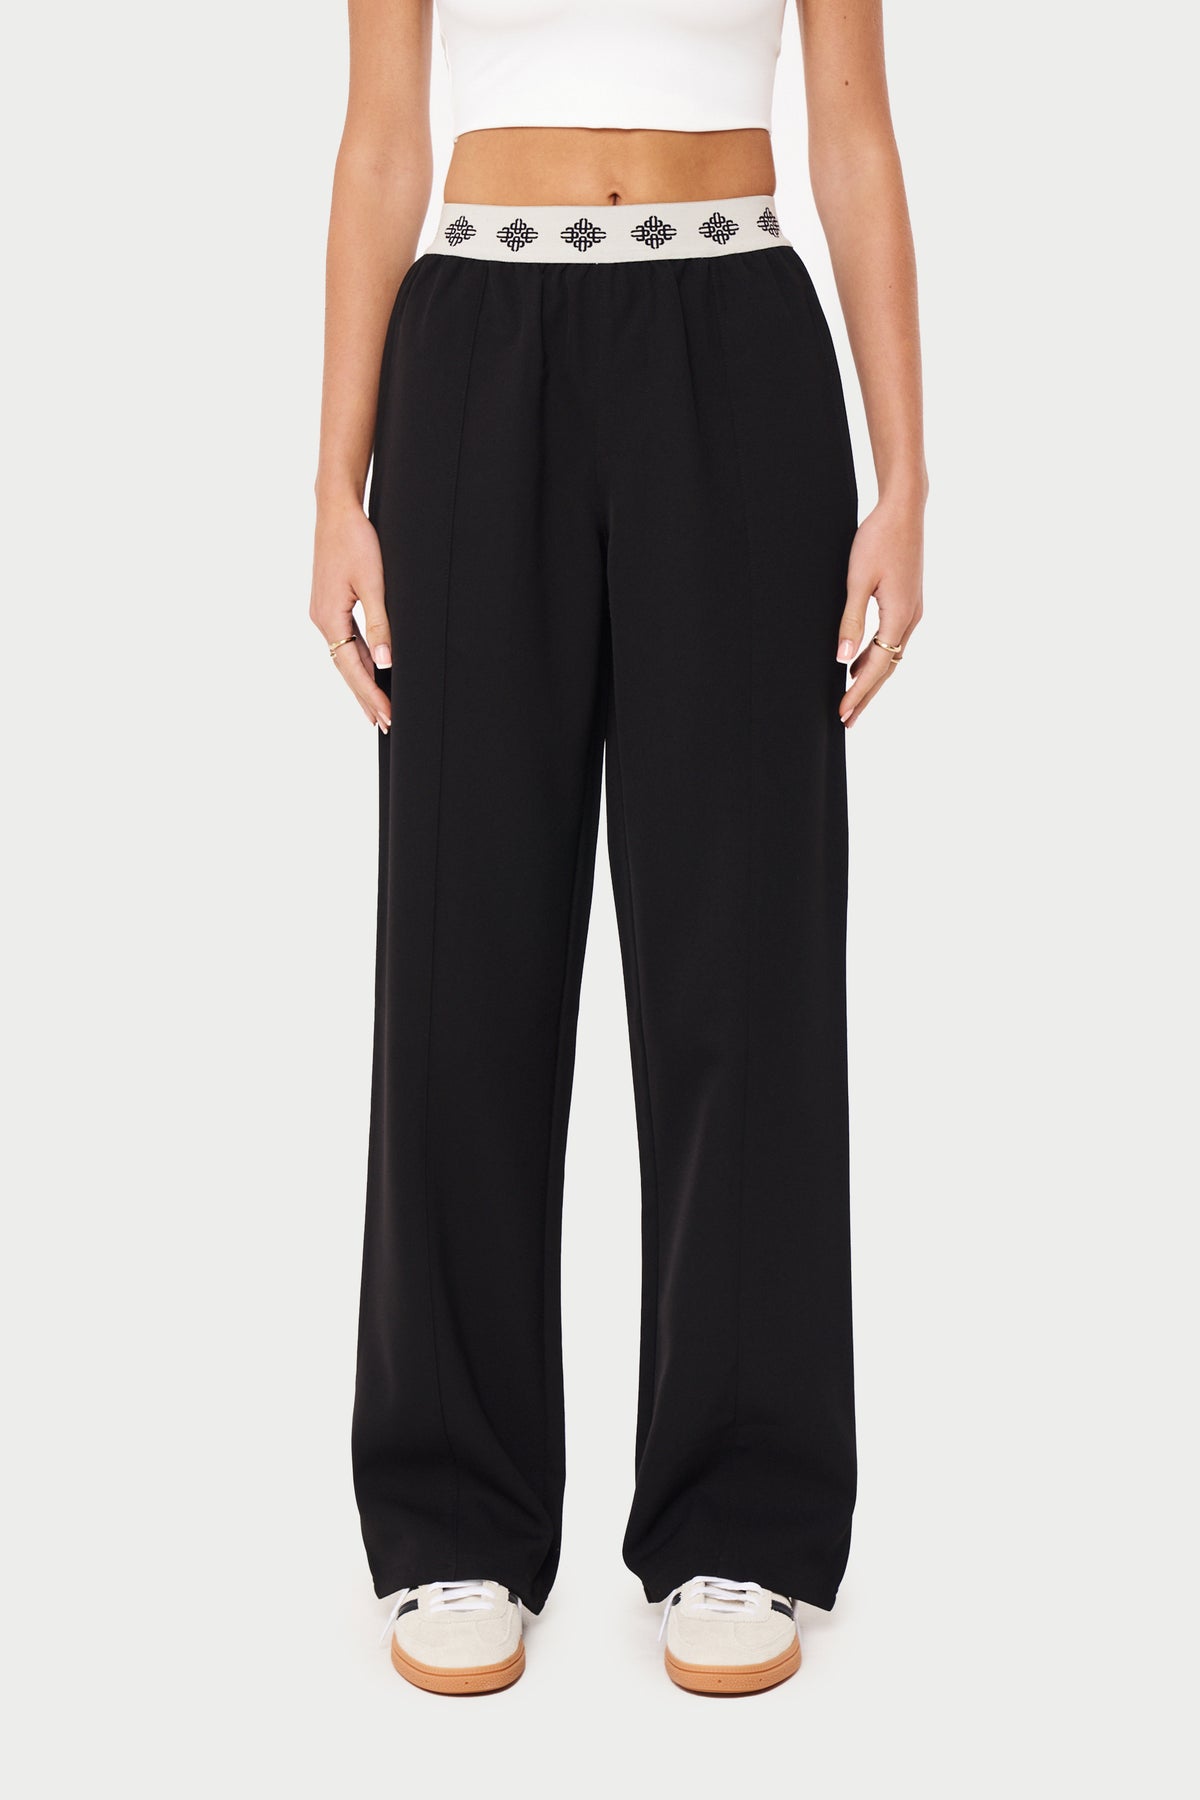 BRANDED WAISTBAND TAILORED PANT - BLACK – The Couture Club